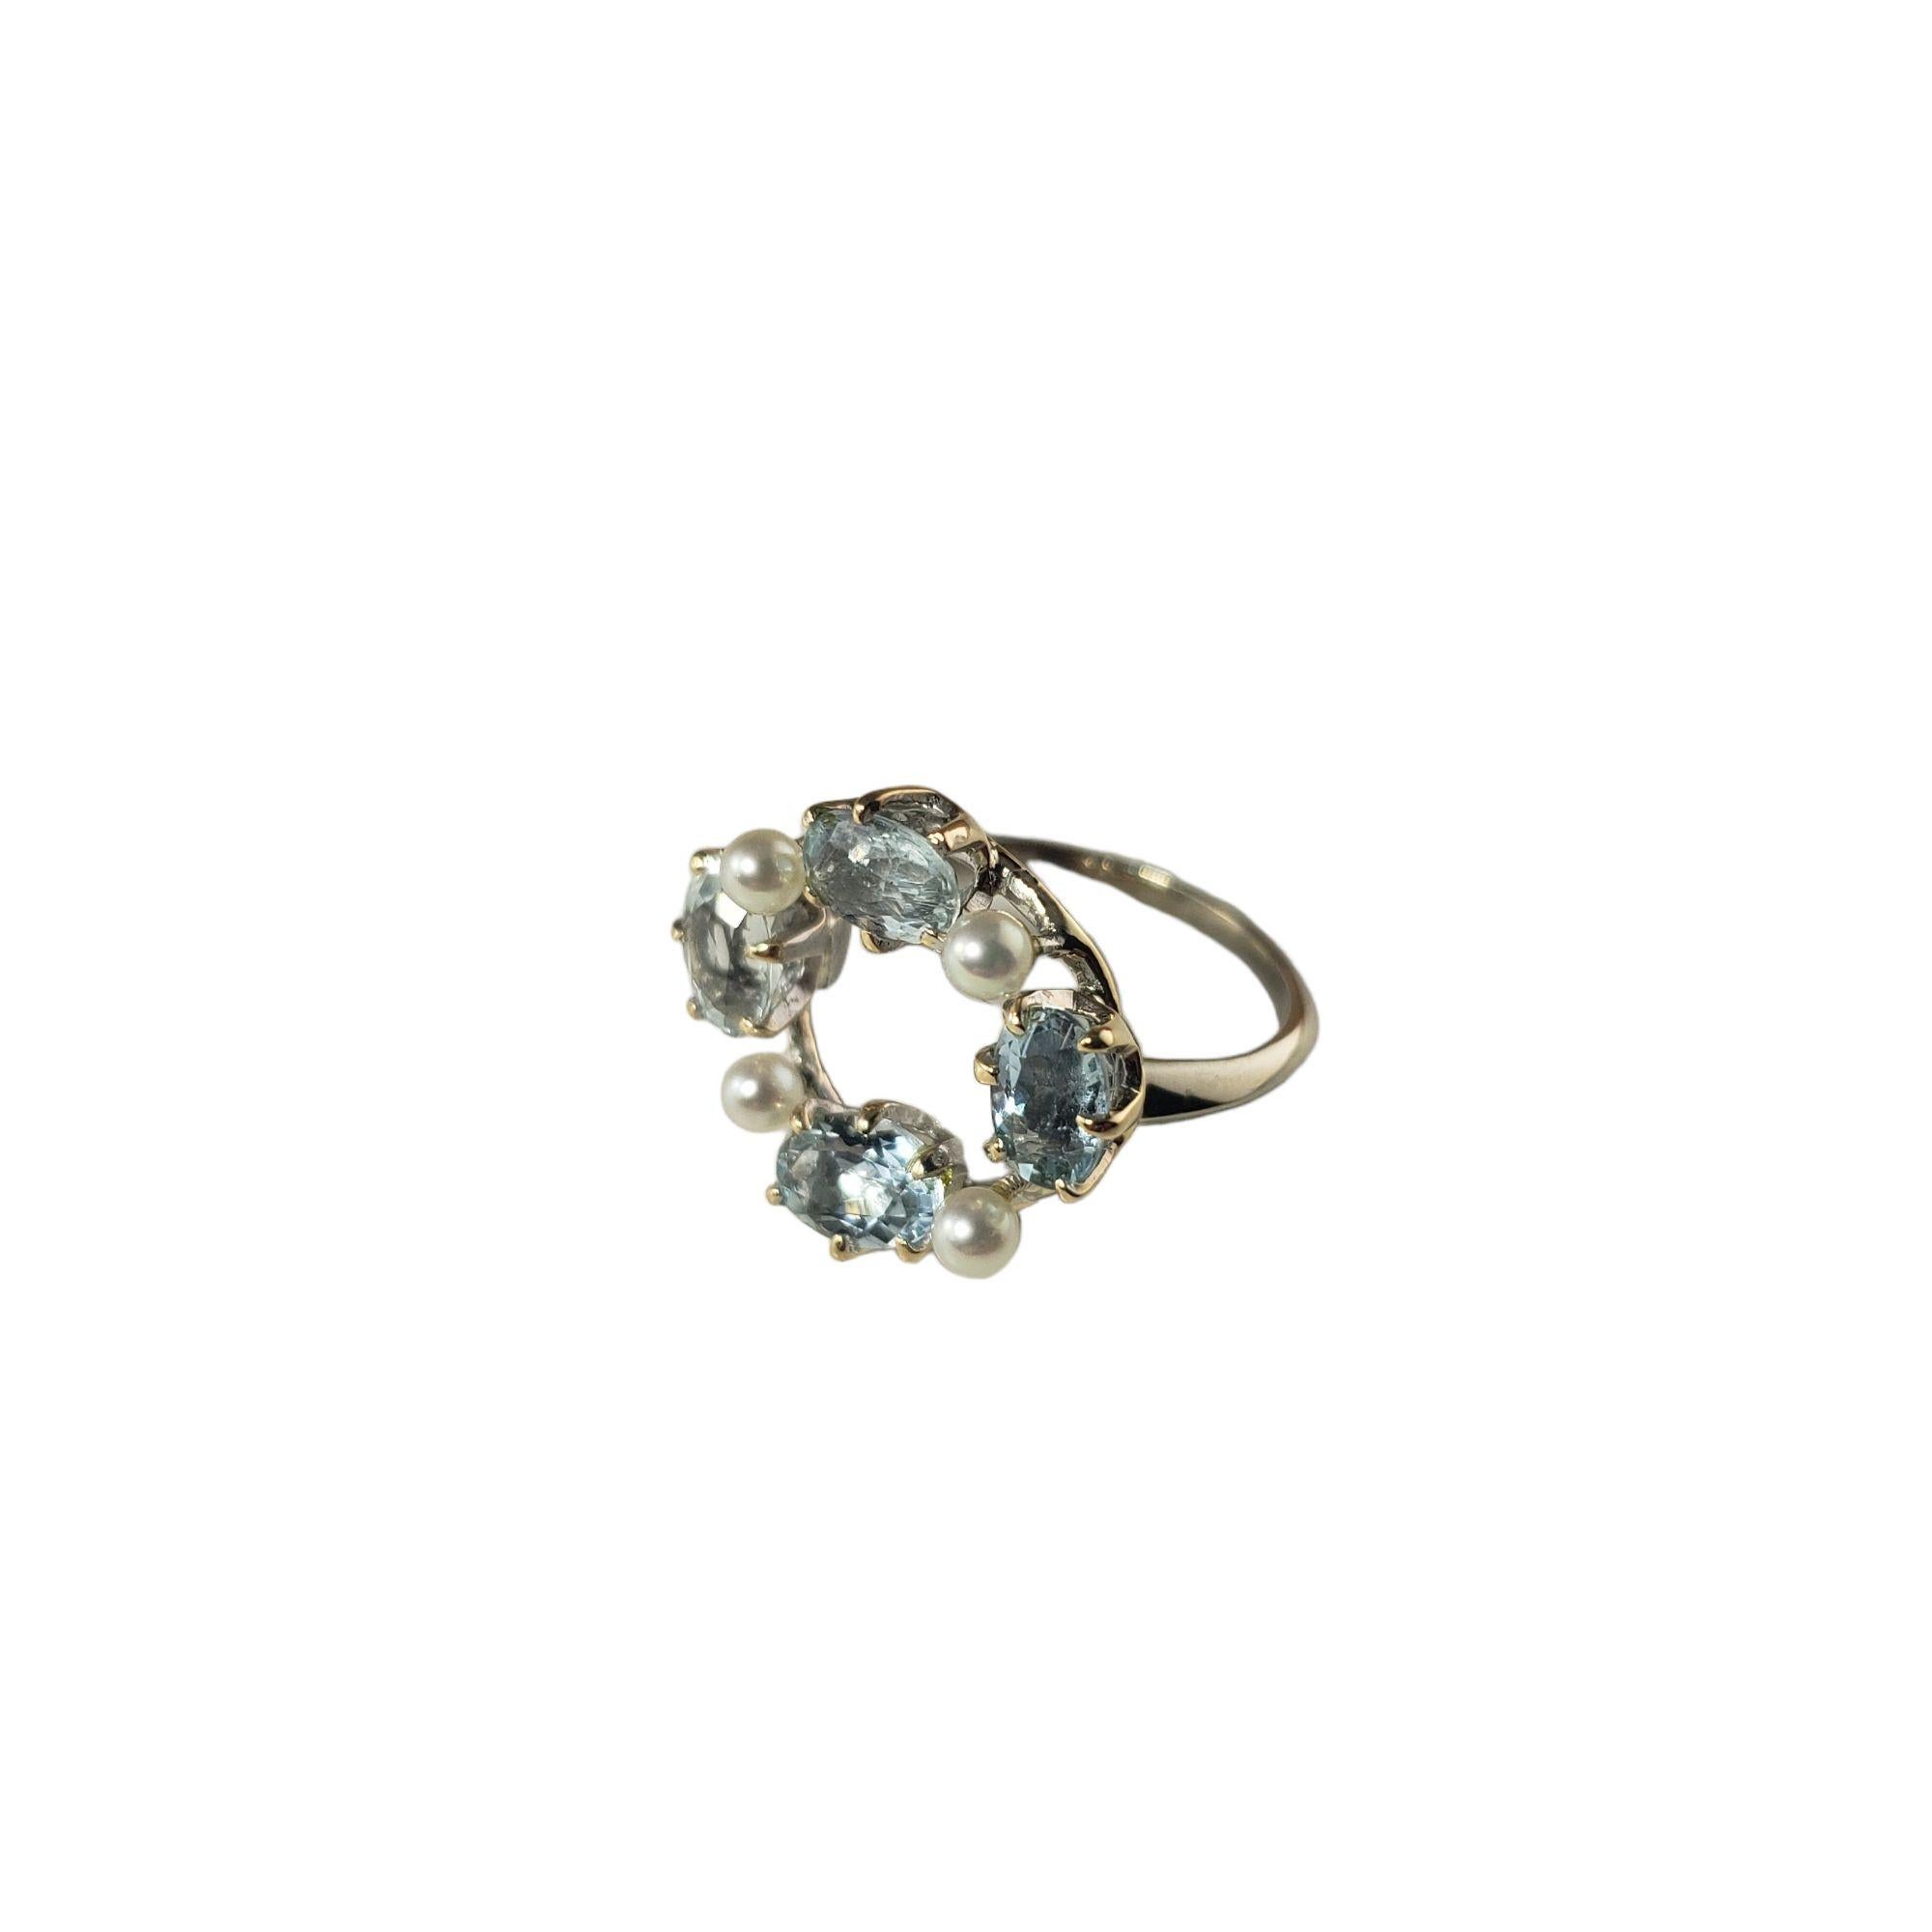 Oval Cut 14 Karat White Gold Blue Topaz and Pearl Ring Size 3.25 #14602 For Sale